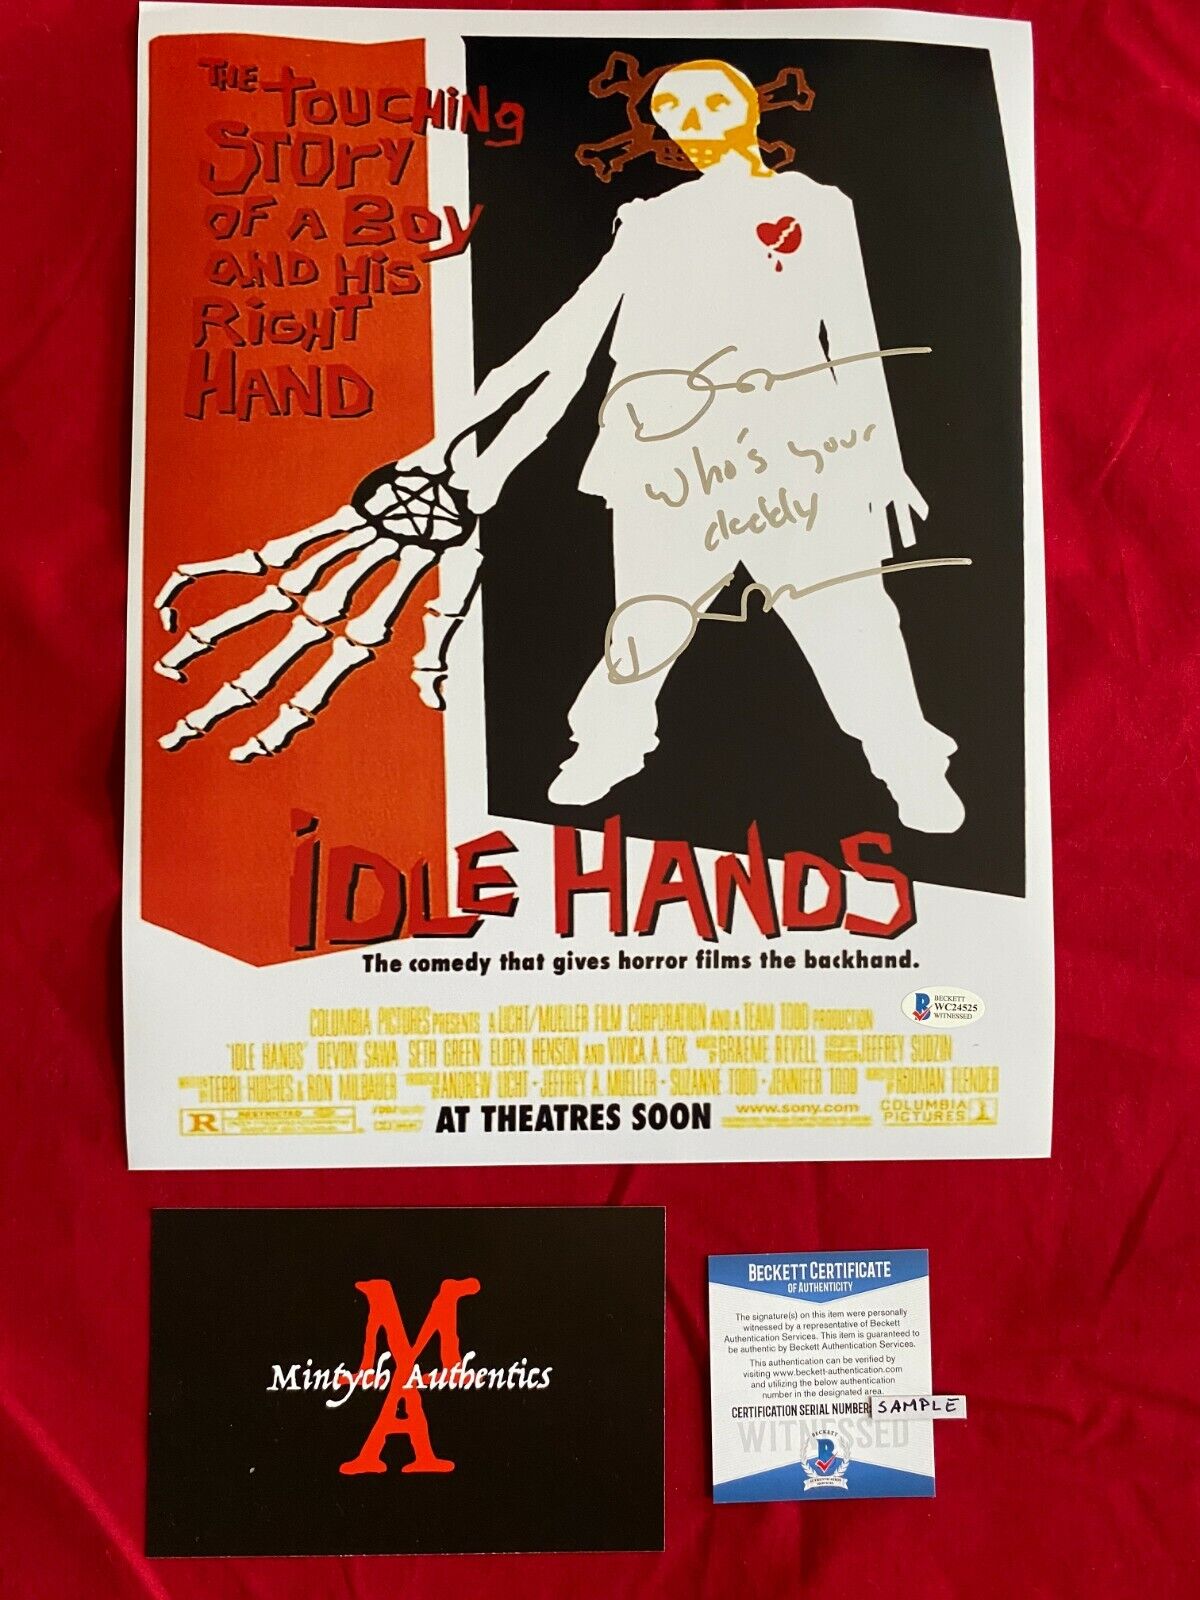 DEVON SAWA AUTOGRAPHED SIGNED 11x14 Photo Poster painting! IDLE HANDS! BECKETT COA HORROR COMEDY